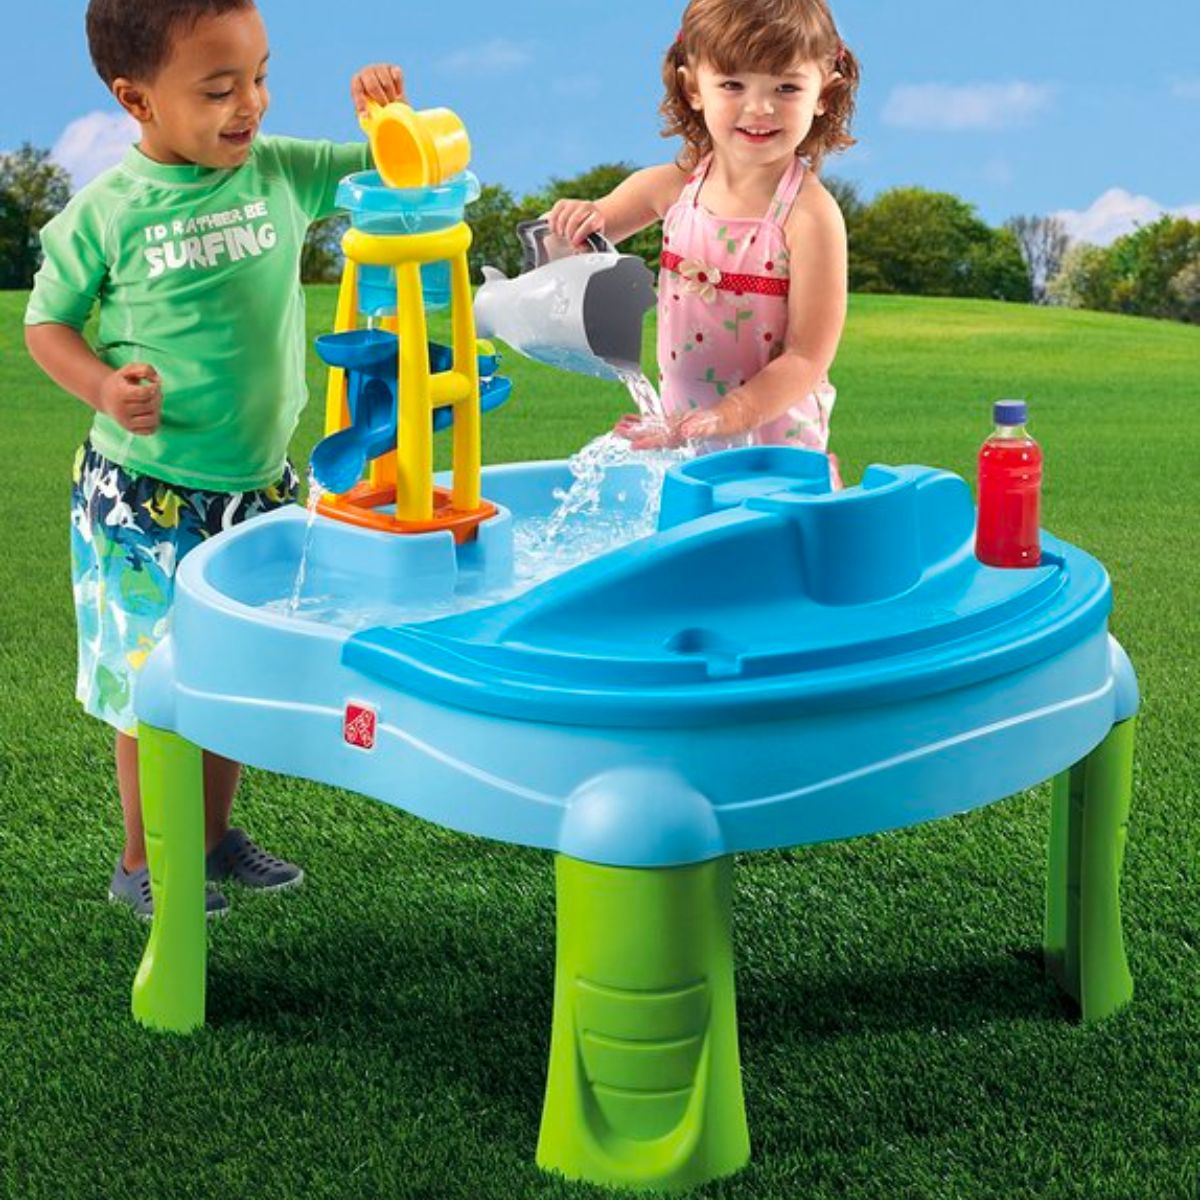 2 toddlers playing with a Splash and Scoop Bay Table